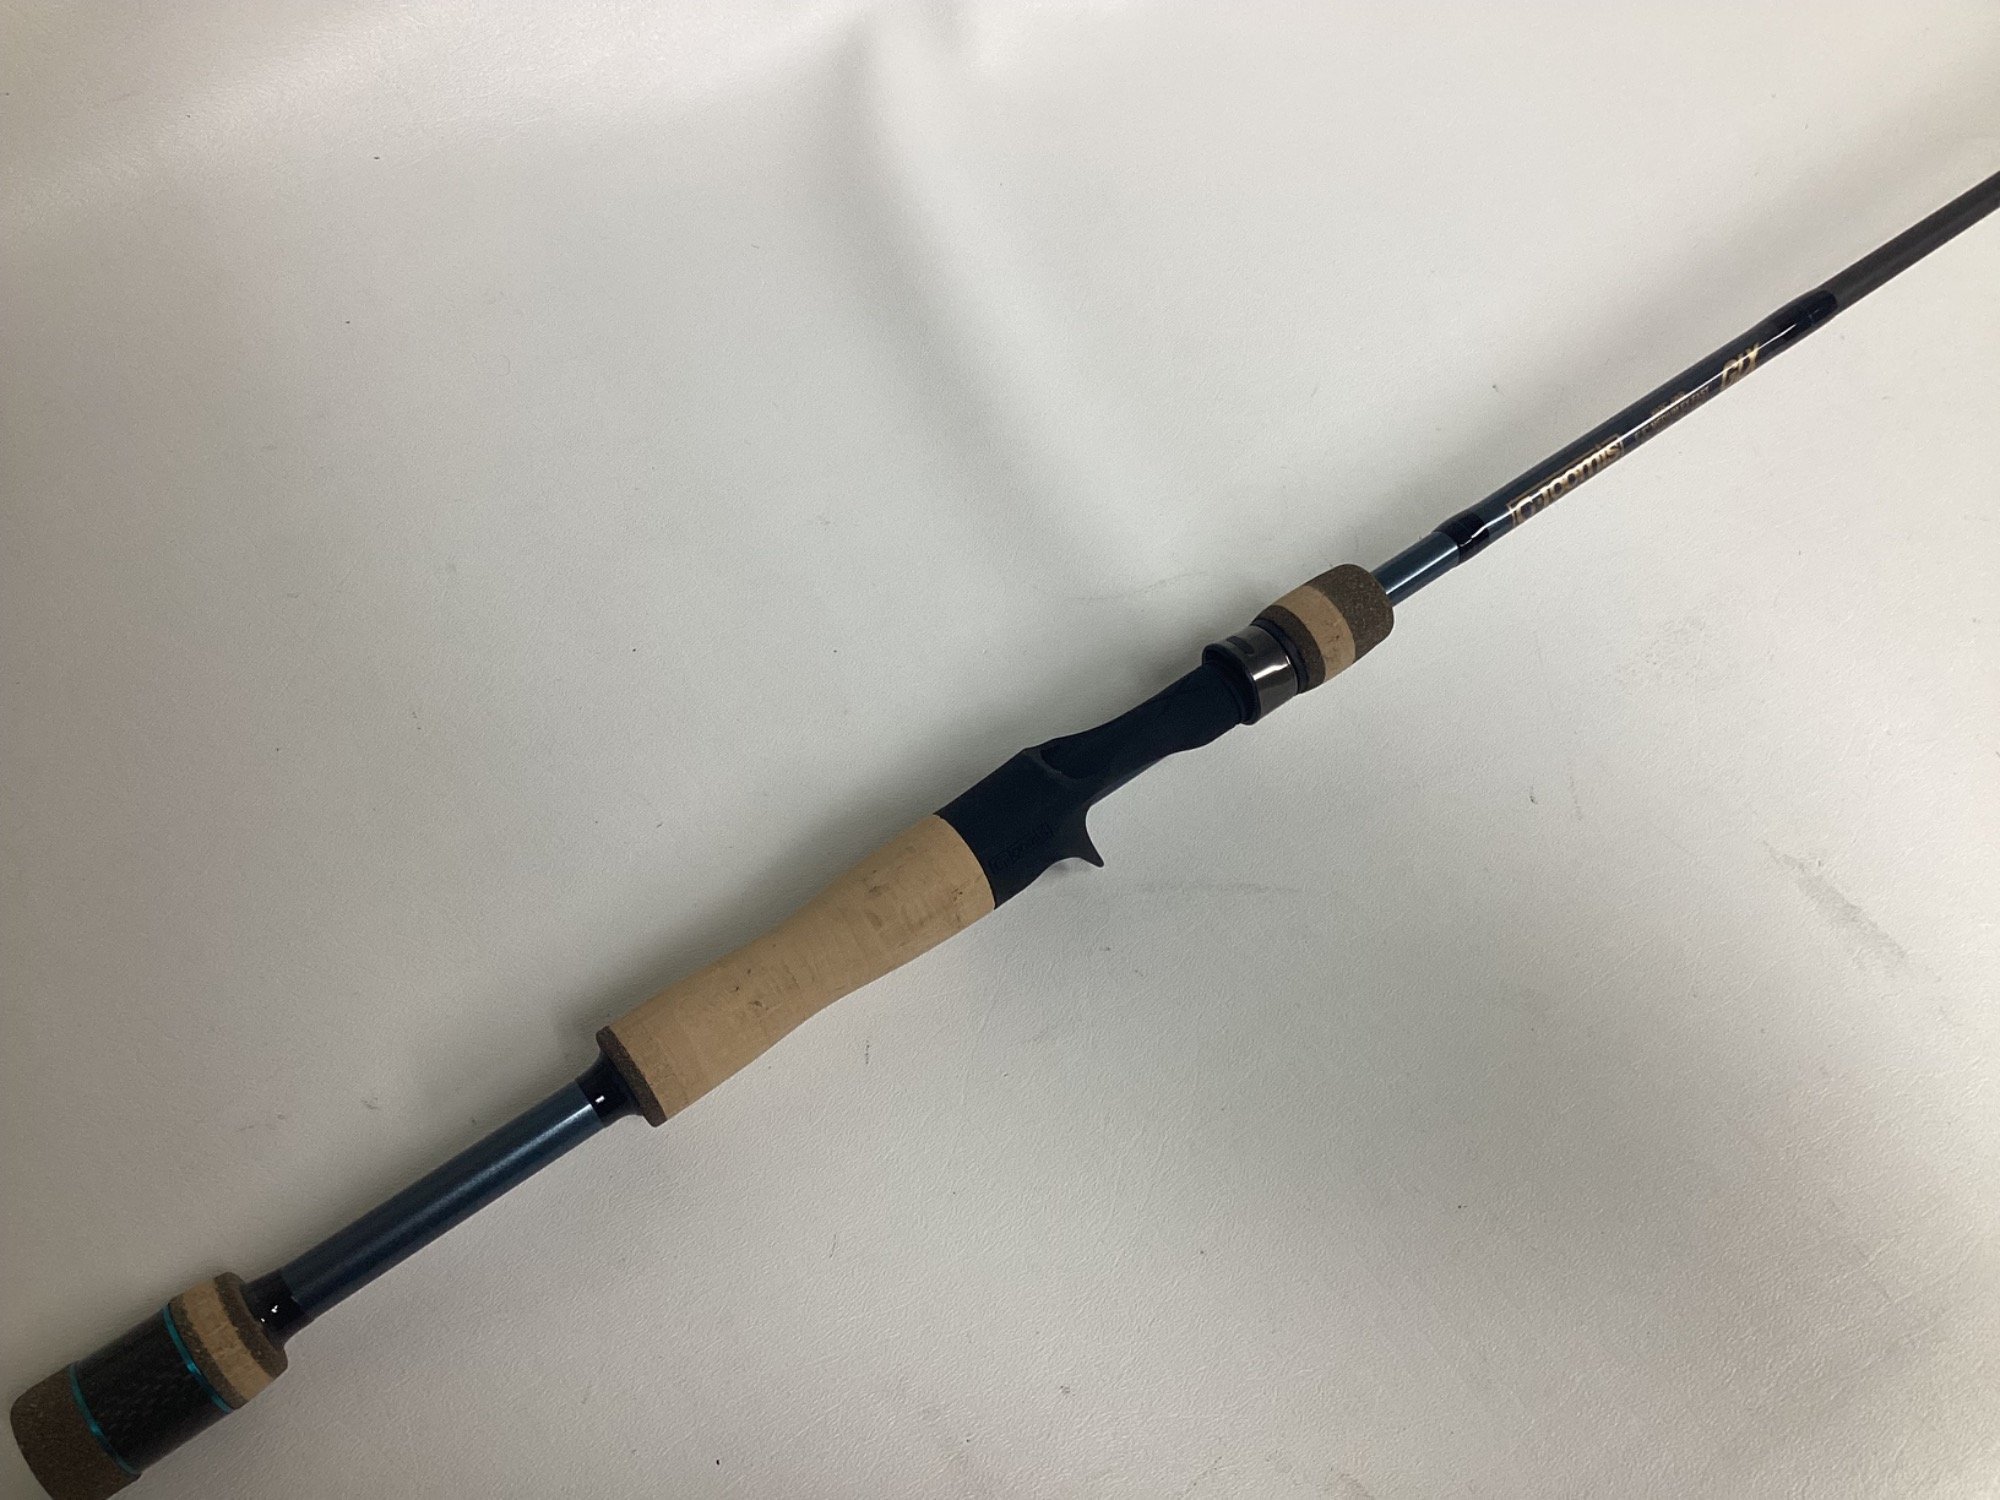 G. Loomis GLX 802C JWR 6'8 Medium - Used Casting Rod - Mint Condition -  American Legacy Fishing, G Loomis Superstore